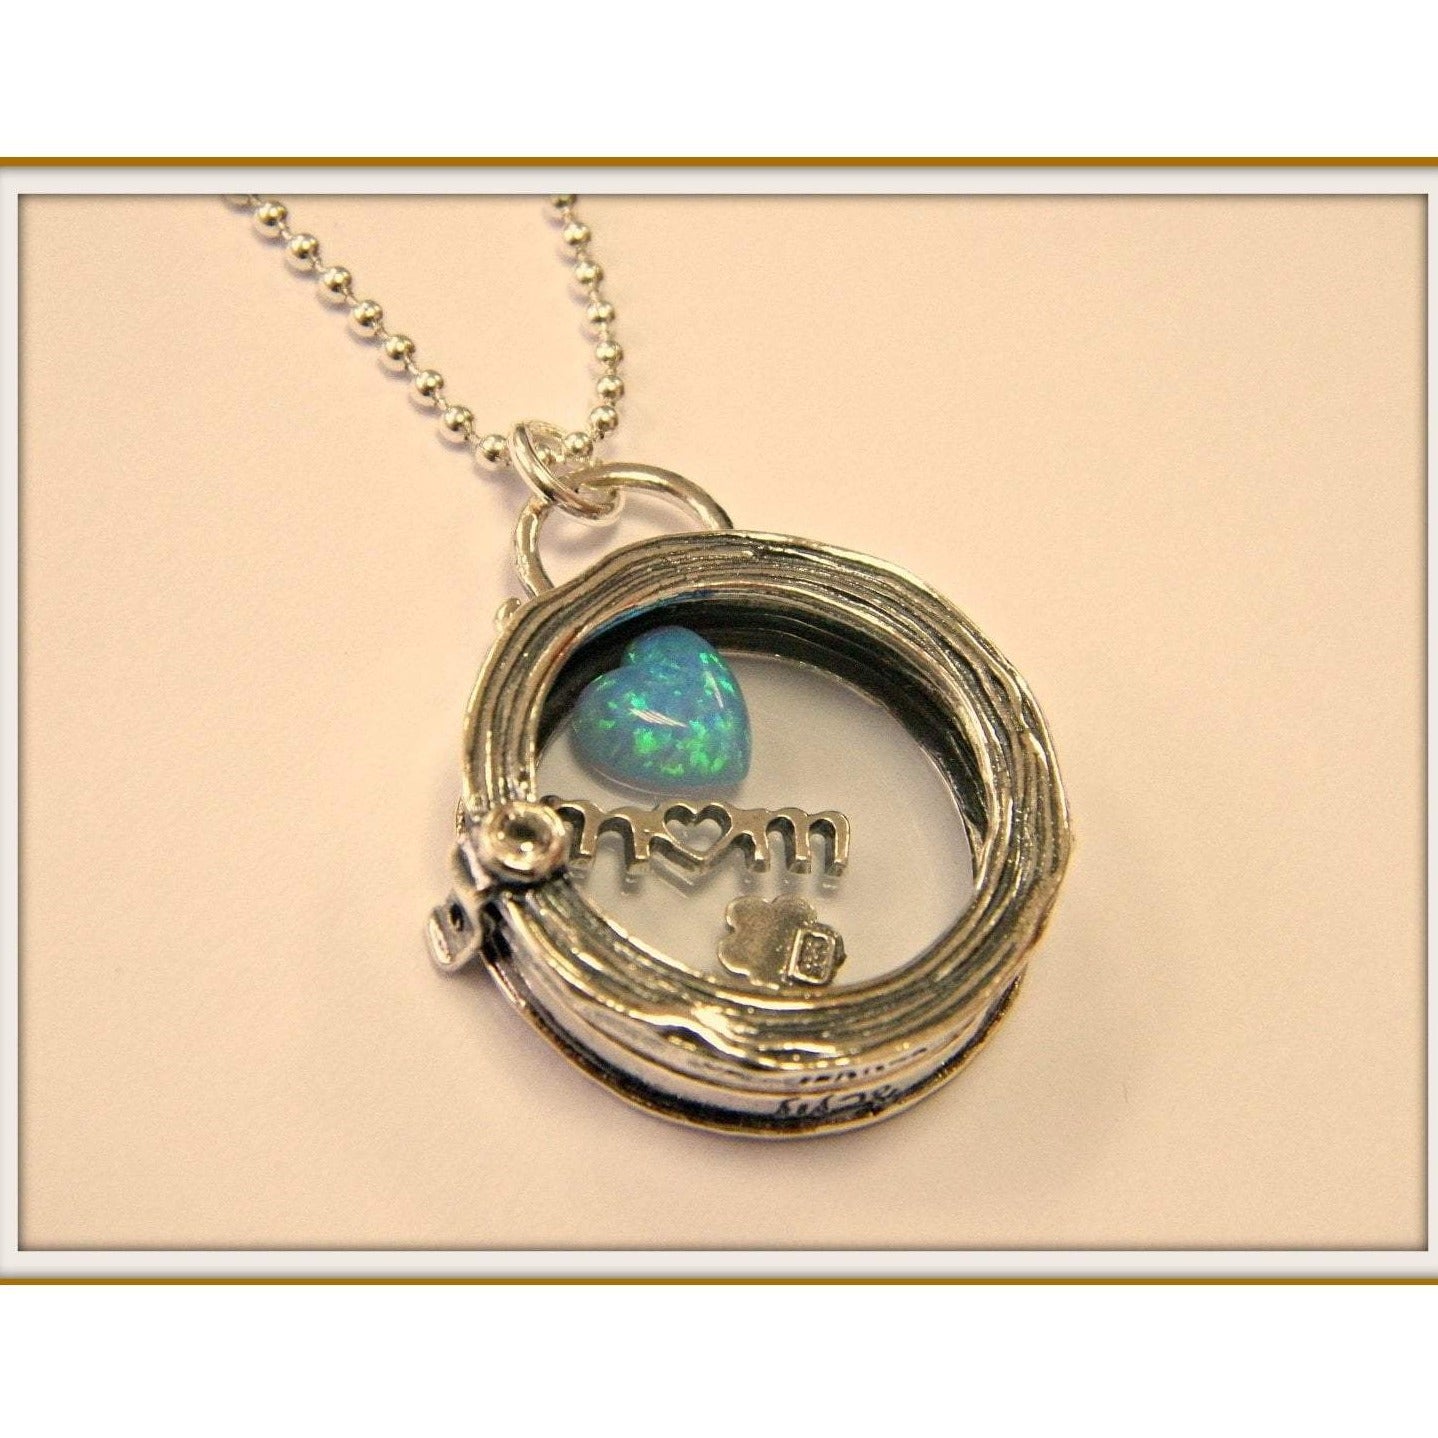 Bluenoemi Jewelry Necklaces & Pendants silver Sterling Silver necklace Mom charms Blue Opal heart gift for Mom Locket Necklace